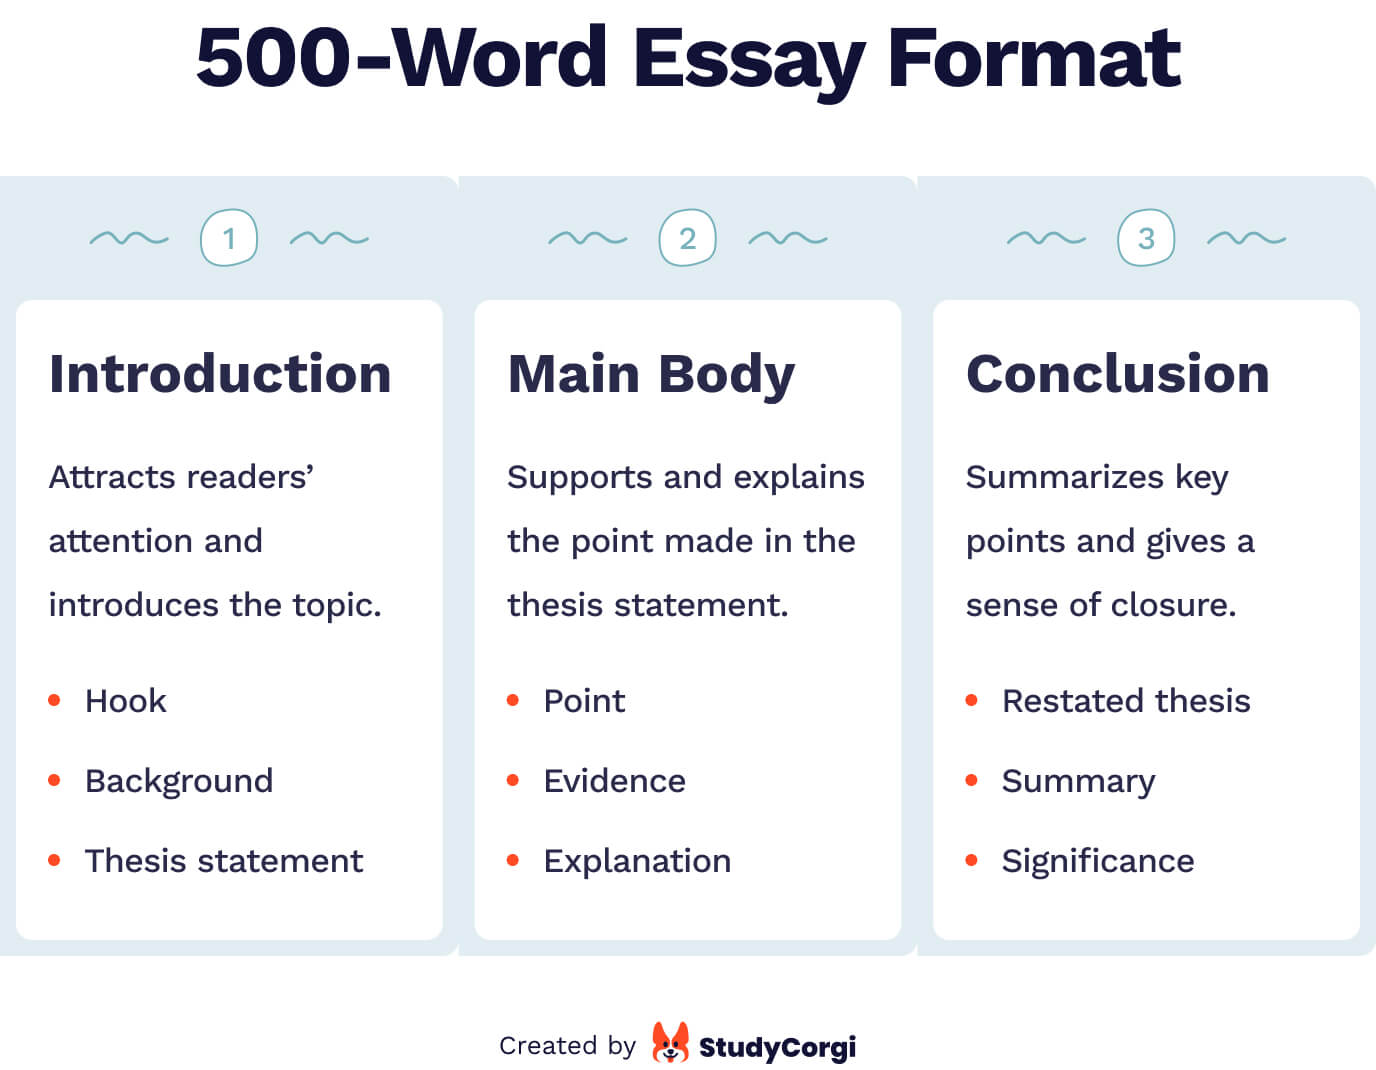 a 500 word essay is how many pages